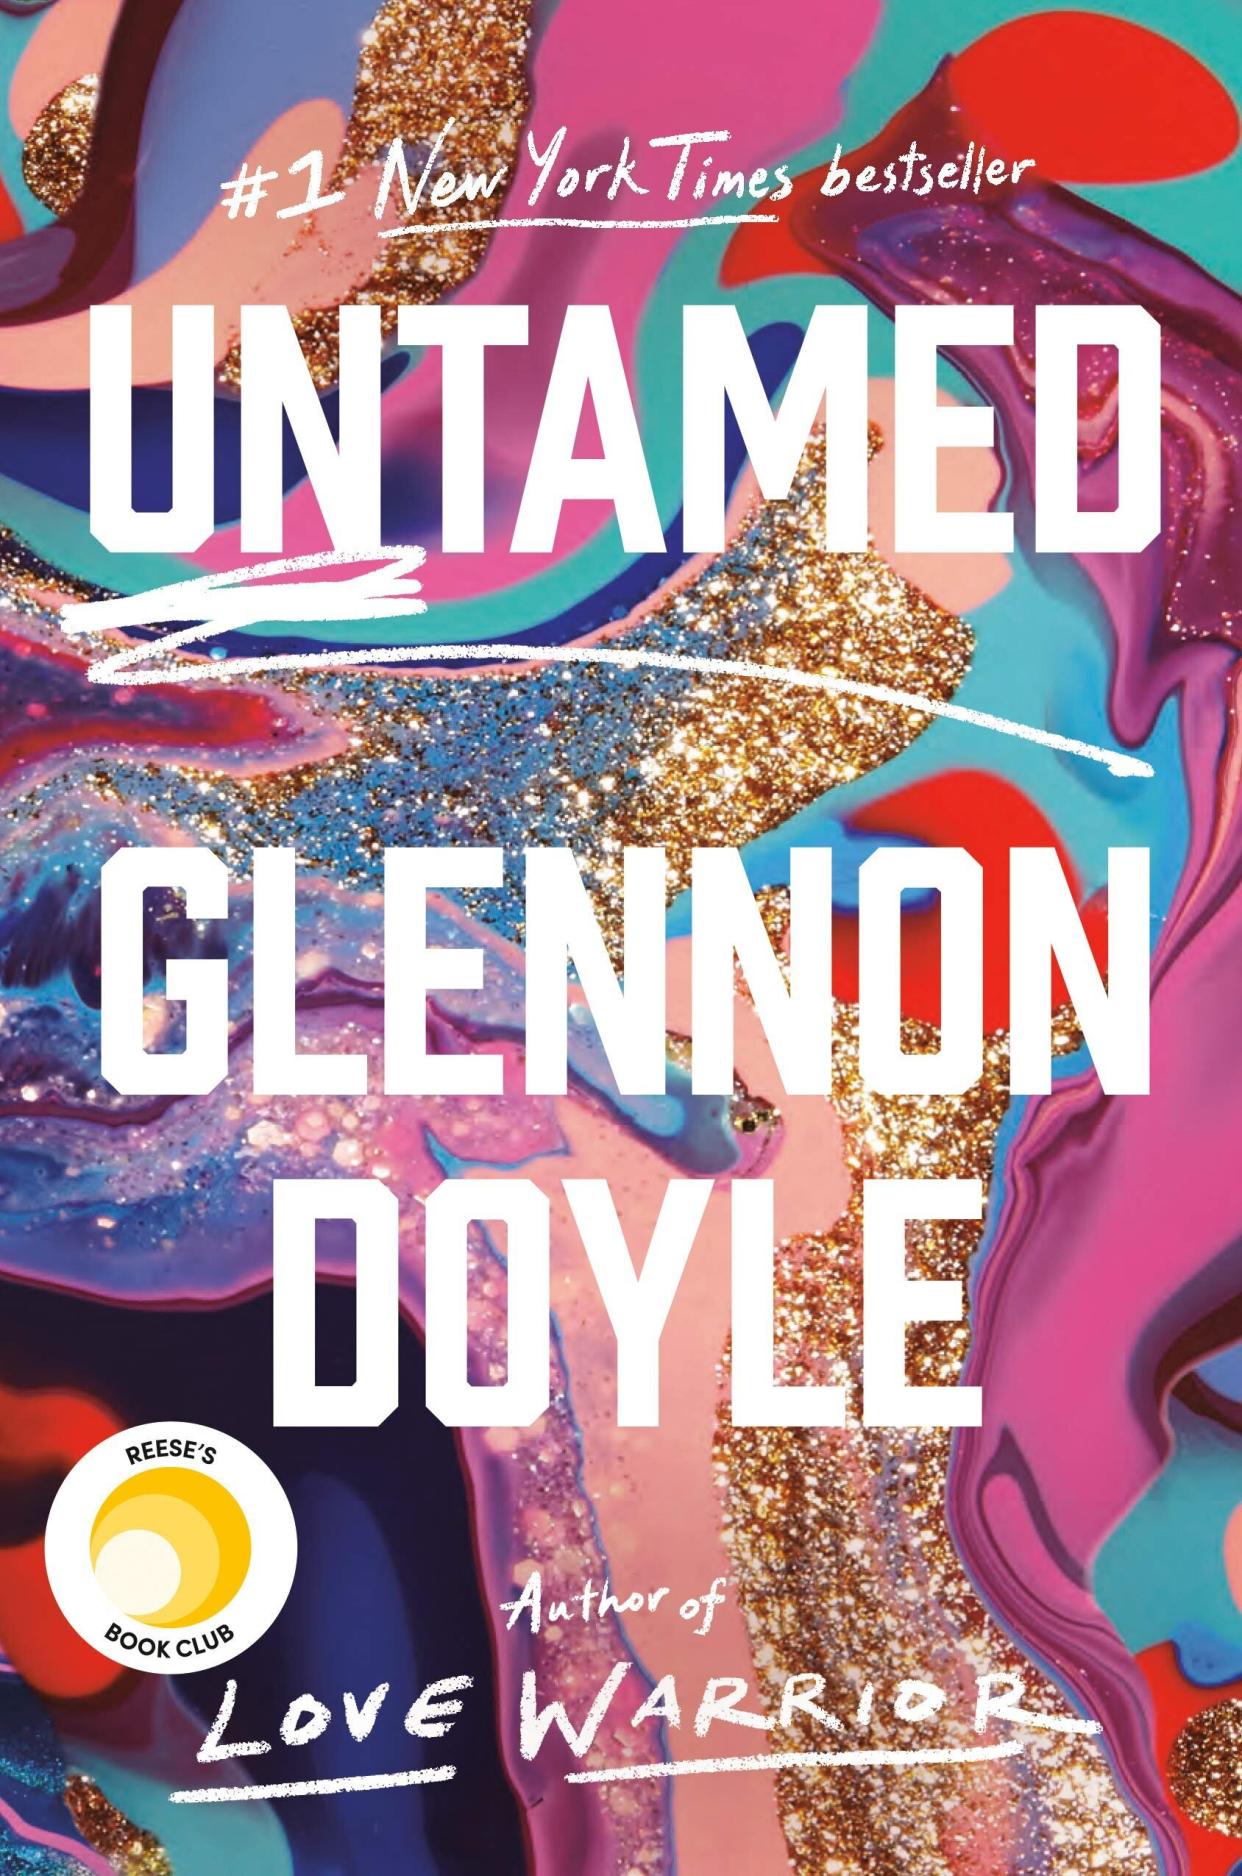 This memoir is about Glennon Doyle going through her divorce and eventually <a href="https://www.nytimes.com/2020/03/05/arts/untamed-glennon-doyle.html" target="_blank" rel="noopener noreferrer">﻿marrying soccer star Abby Wambach</a>. Since its release in March, "Untamed" already has almost 2,000 reviews. <br /><br />You can read more about this book at <a href="https://www.goodreads.com/book/show/52129515-untamed" target="_blank" rel="noopener noreferrer">Goodreads</a> and find it for $17 at <a href="https://amzn.to/2MoU2XZ" target="_blank" rel="noopener noreferrer">Amazon</a>.